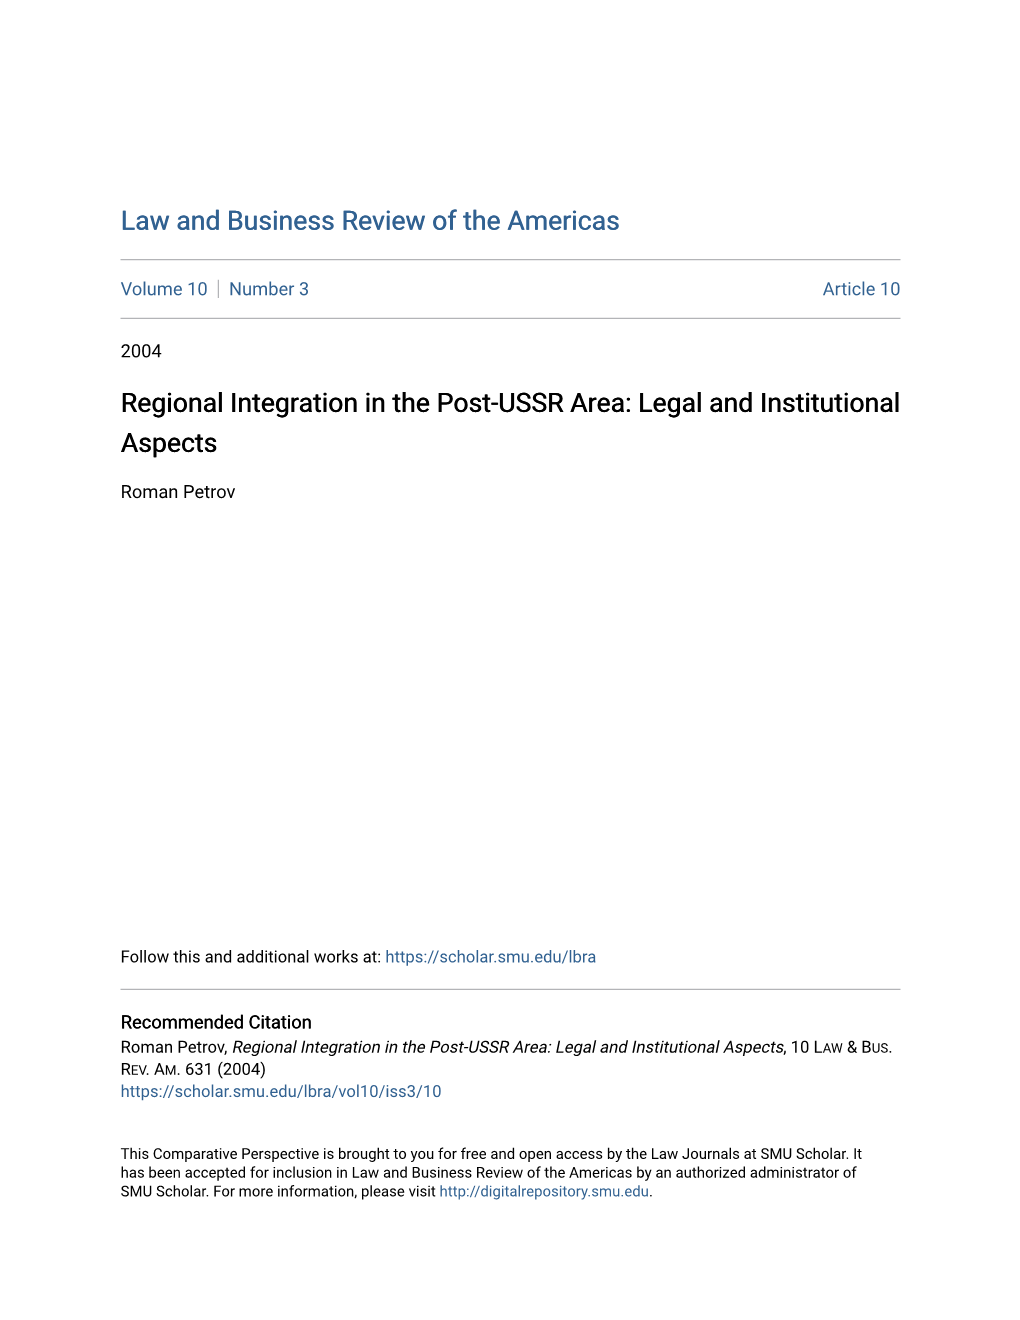 Regional Integration in the Post-USSR Area: Legal and Institutional Aspects